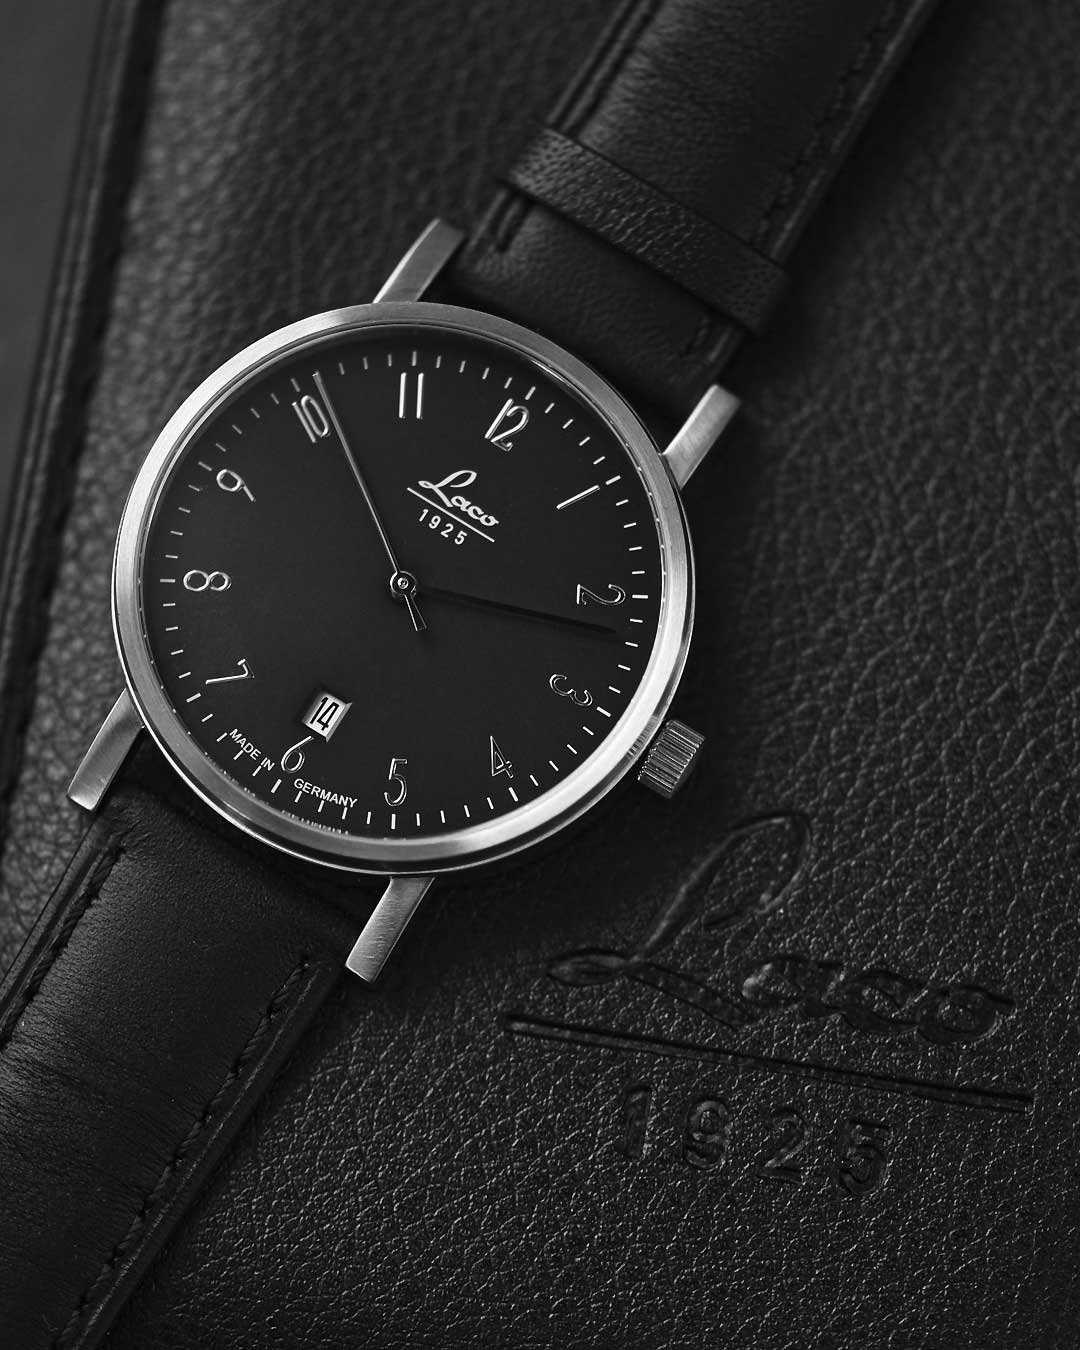 Review Jena 40 from Laco 1925 - 862068 – WATCHDAVID® - THE WATCH BLOG